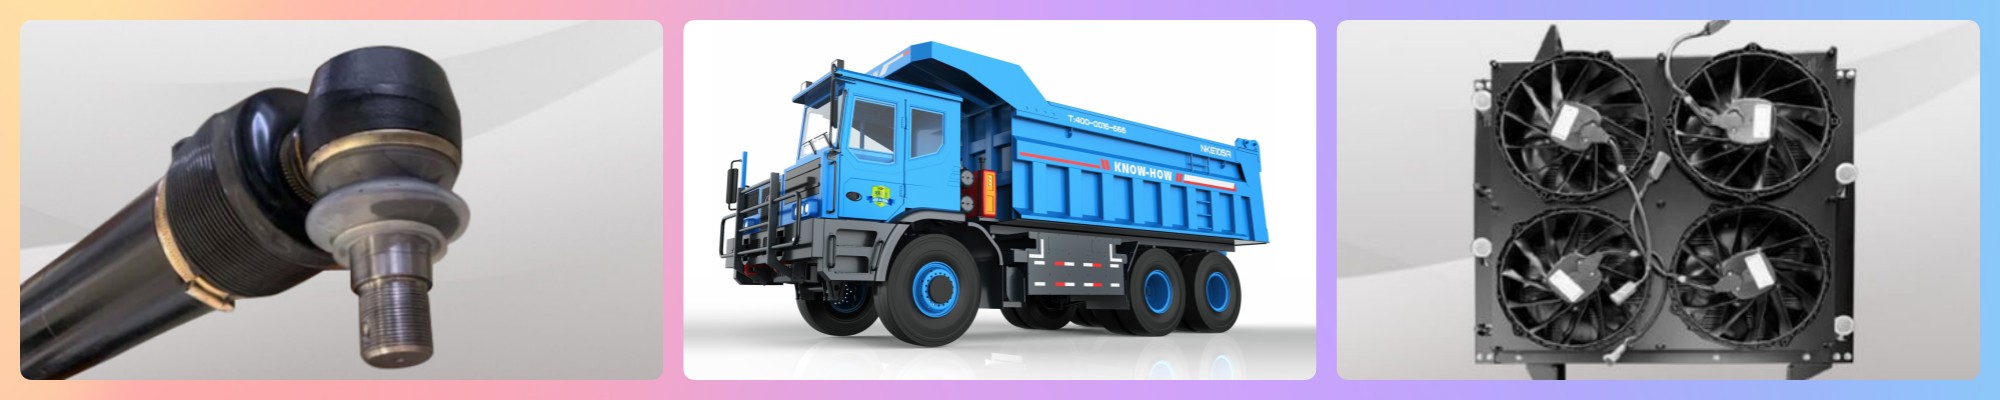 105 Tons 564kwh Mining Electric Dump Truck